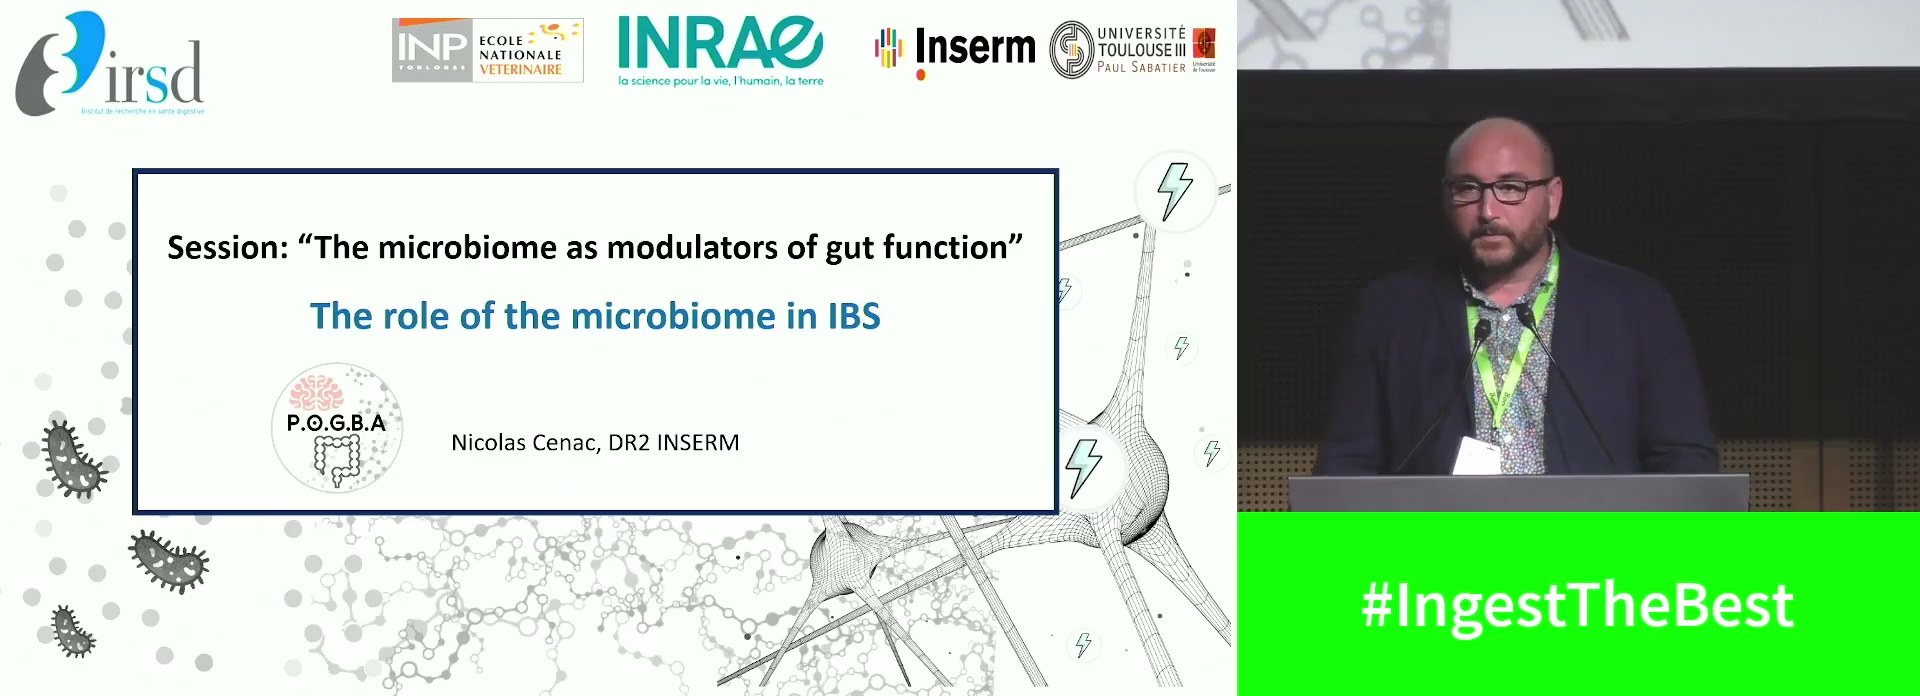 The role of the microbiome in IBS